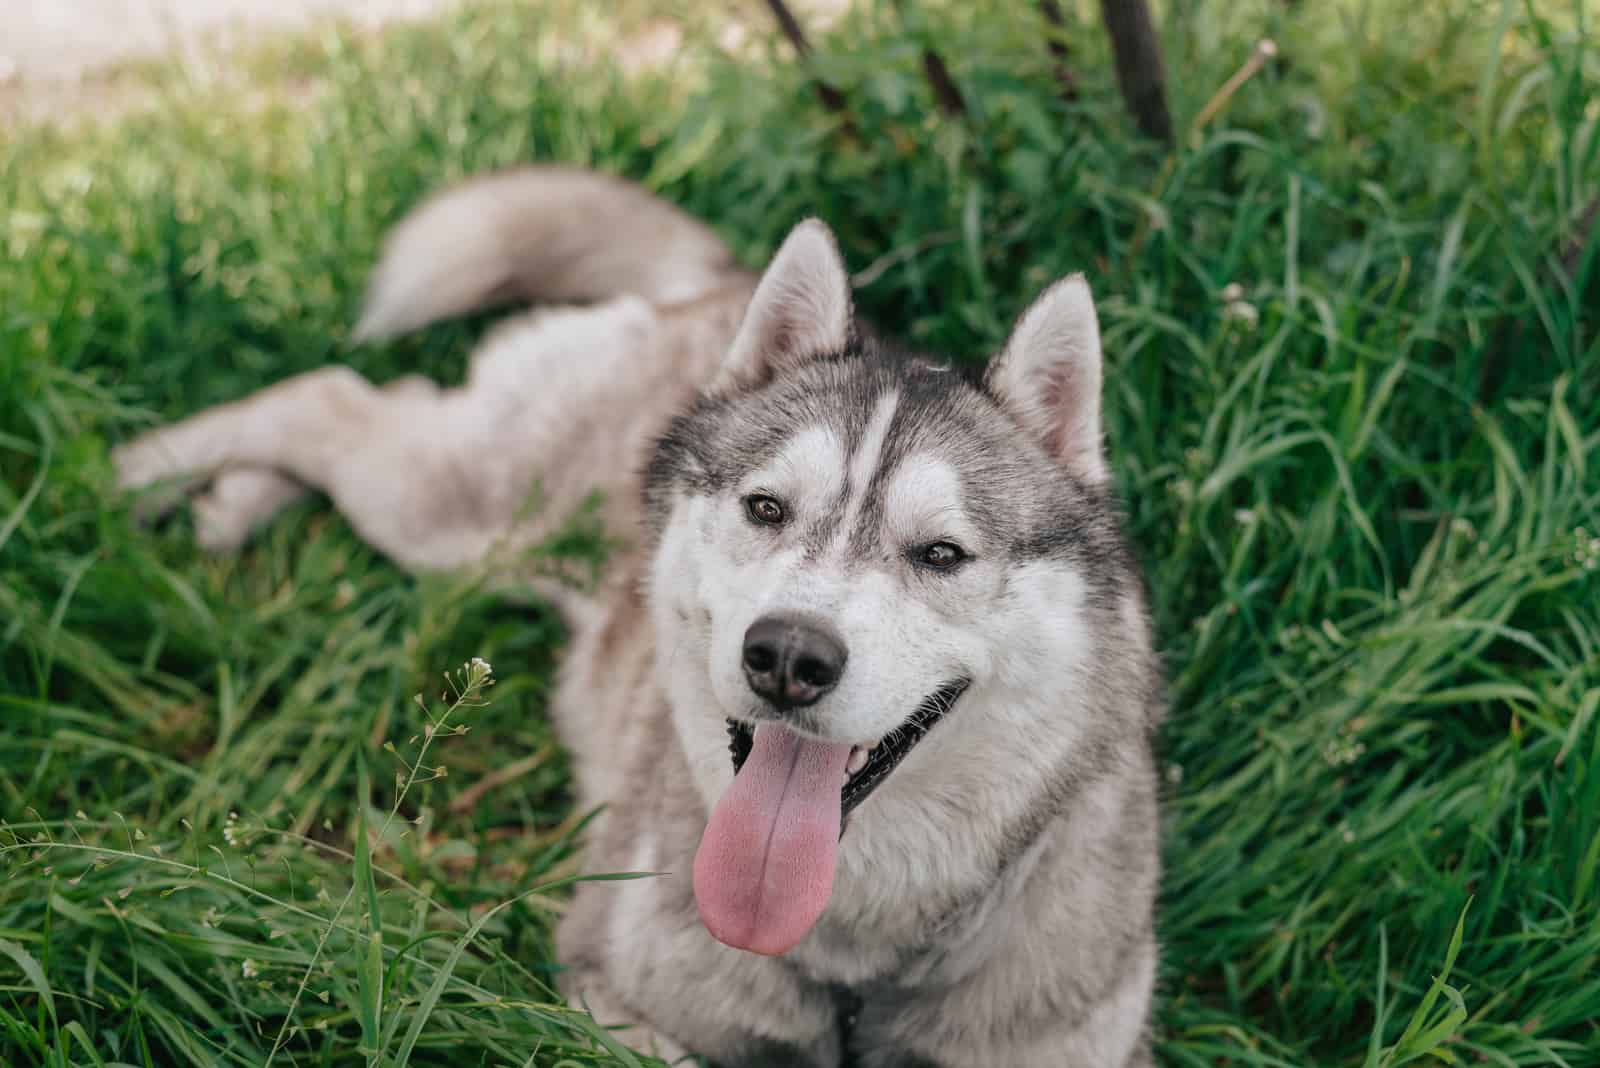 dog lying on the grass